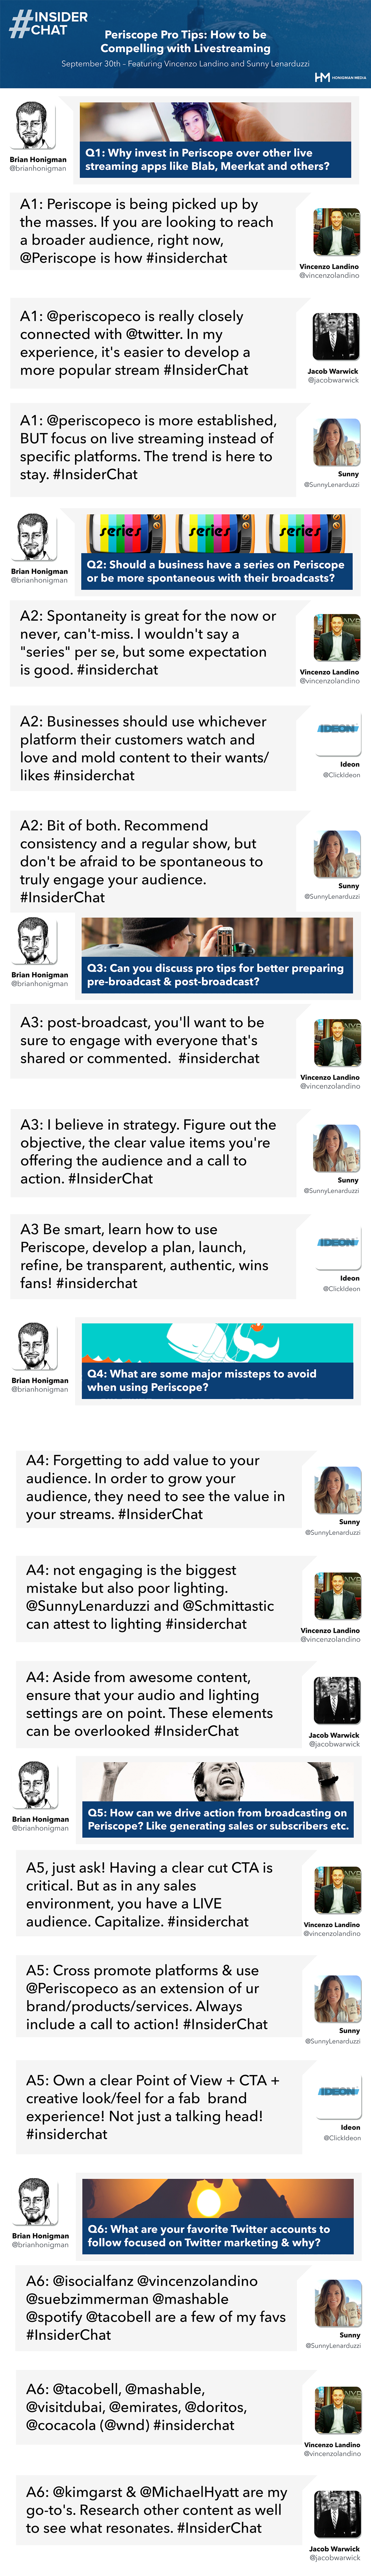 Insider-chat-infographic-3-1